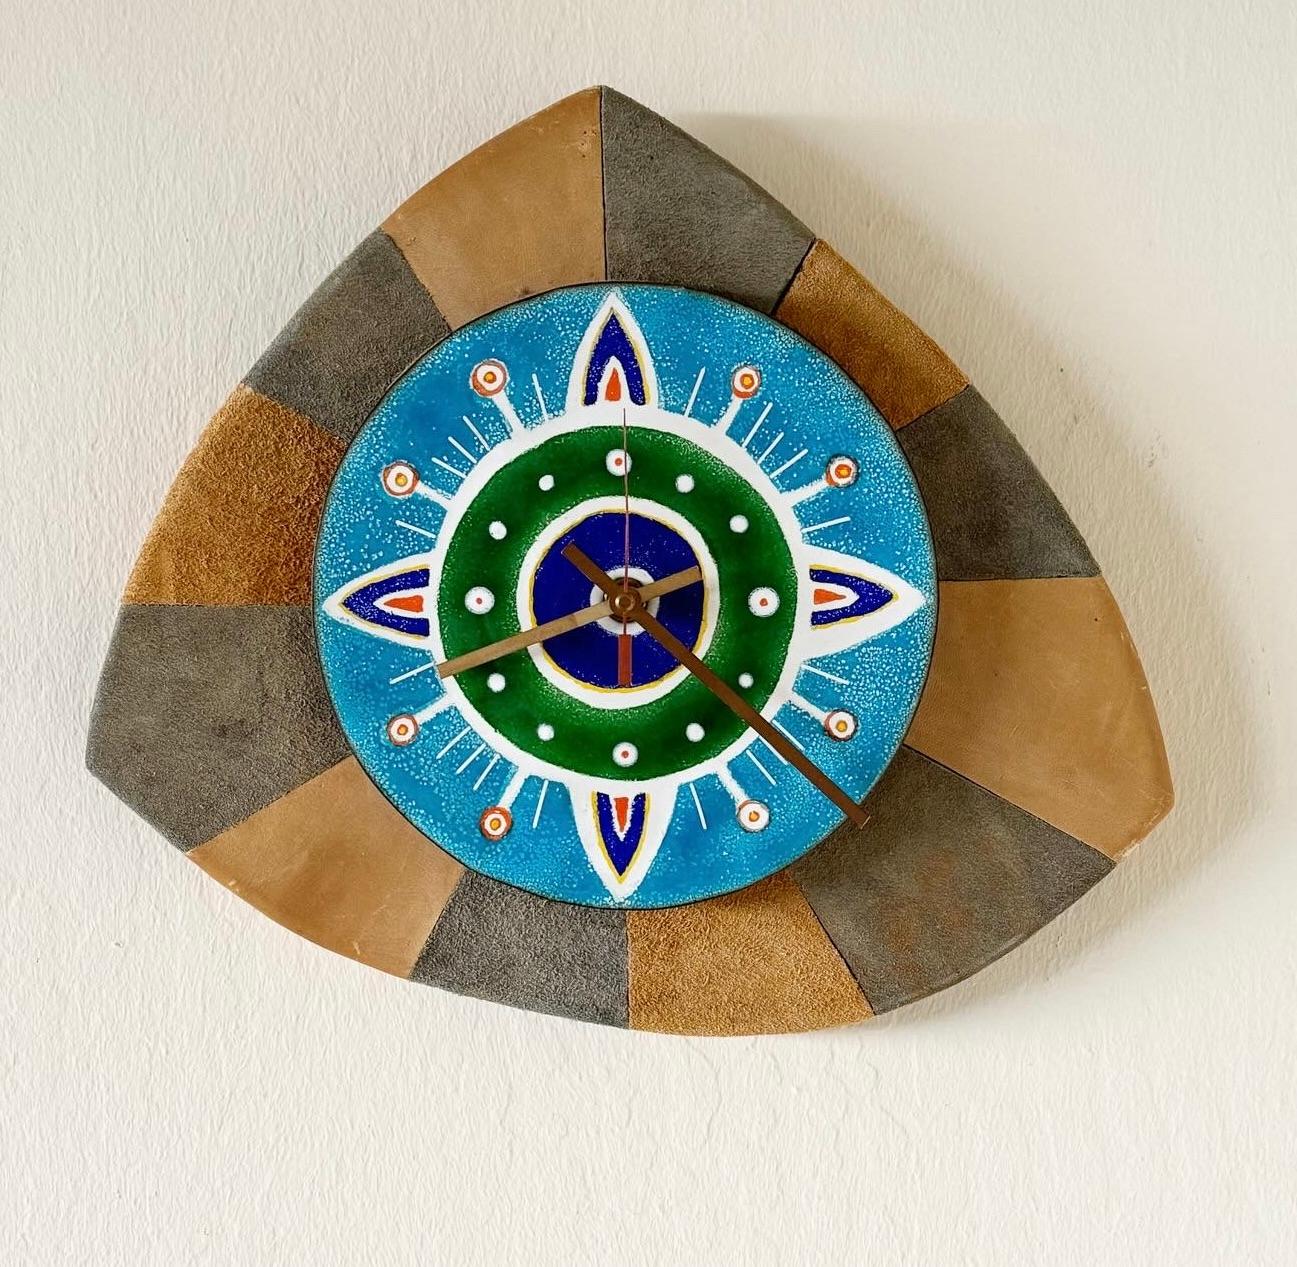 Late 1970s one of a kind handmade wall clock, constructed of a radius of earth toned suede on a solid asymmetrical wooden frame. The clock face is an abstract enameled copper in blue, white, orange and green with copper minute, hour and second